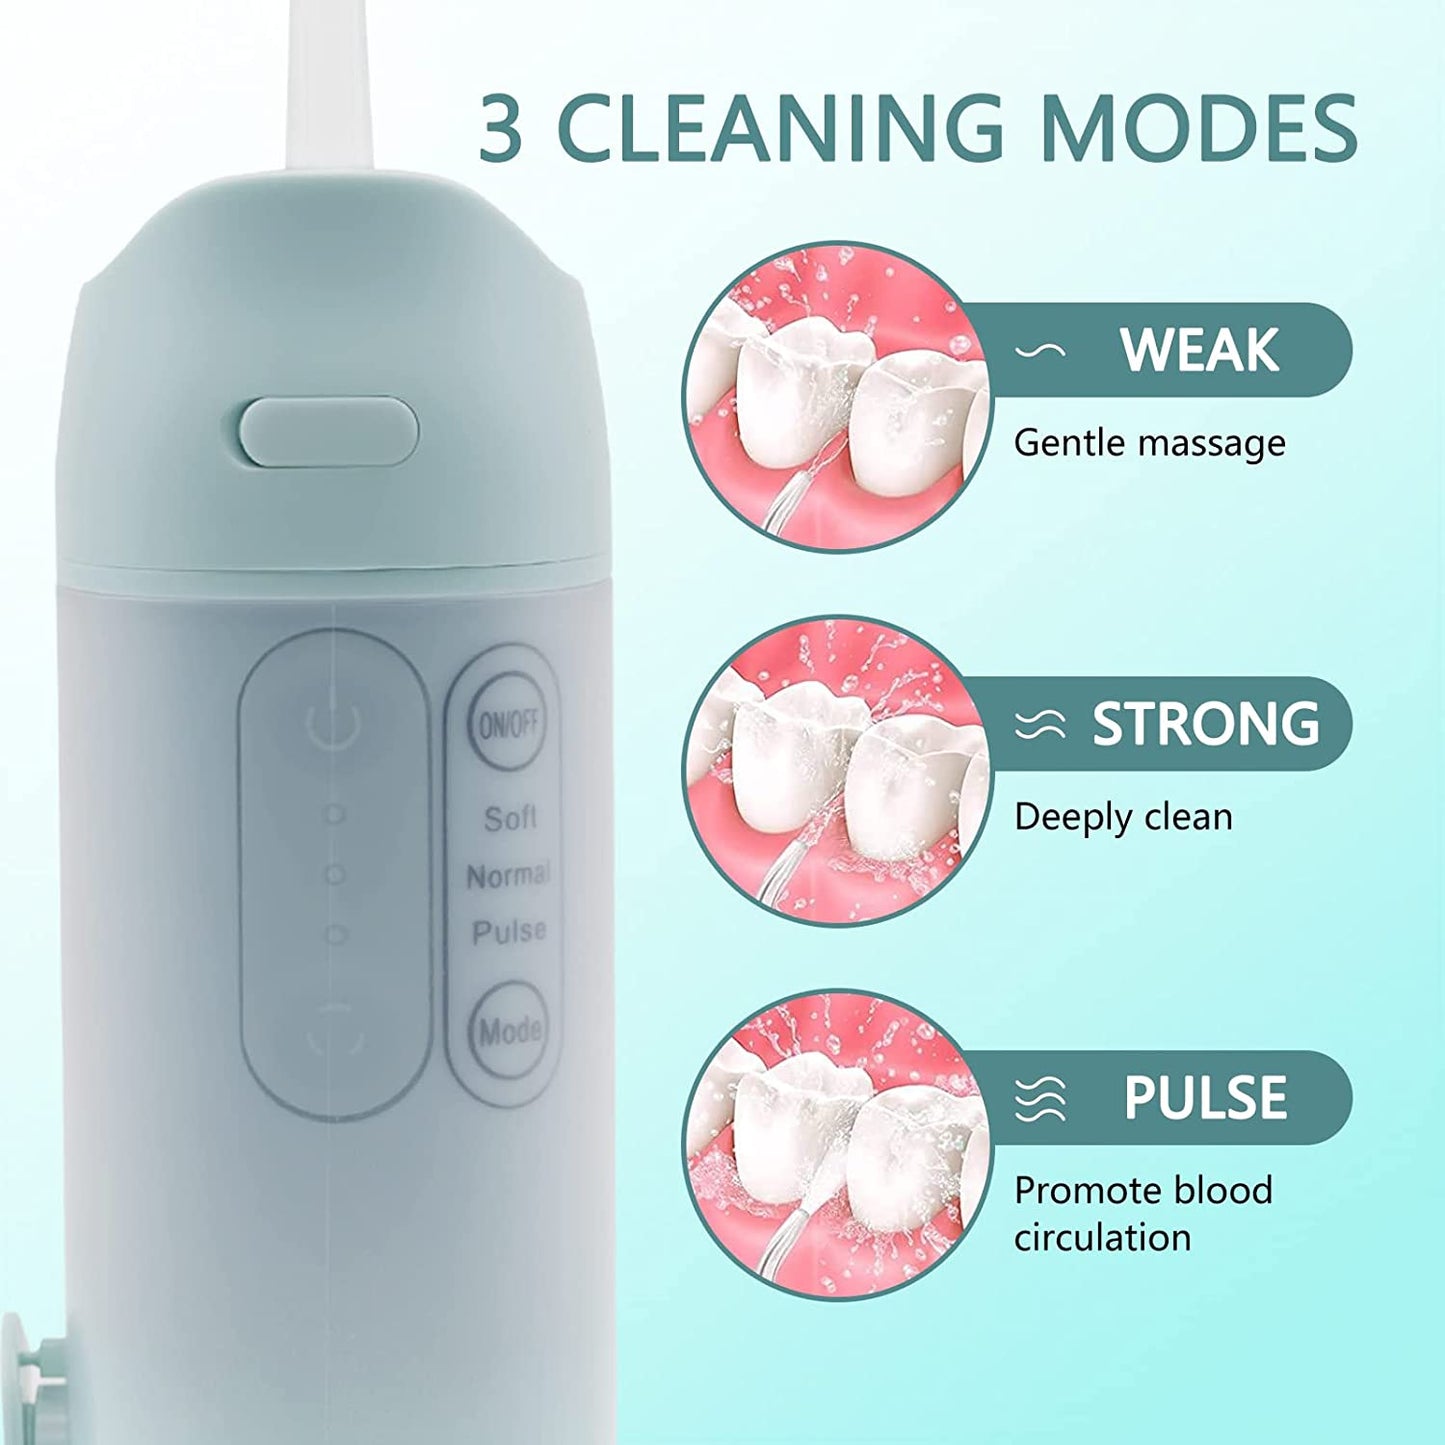 Cordless Water Flosser, Dental Oral Irrigator, Professional 300ML Water Teeth Cleaner 3 Modes with 4 Replaceable Jet Tips & Detachable Water Tank for Home Travel Braces Bridges Care IPX7